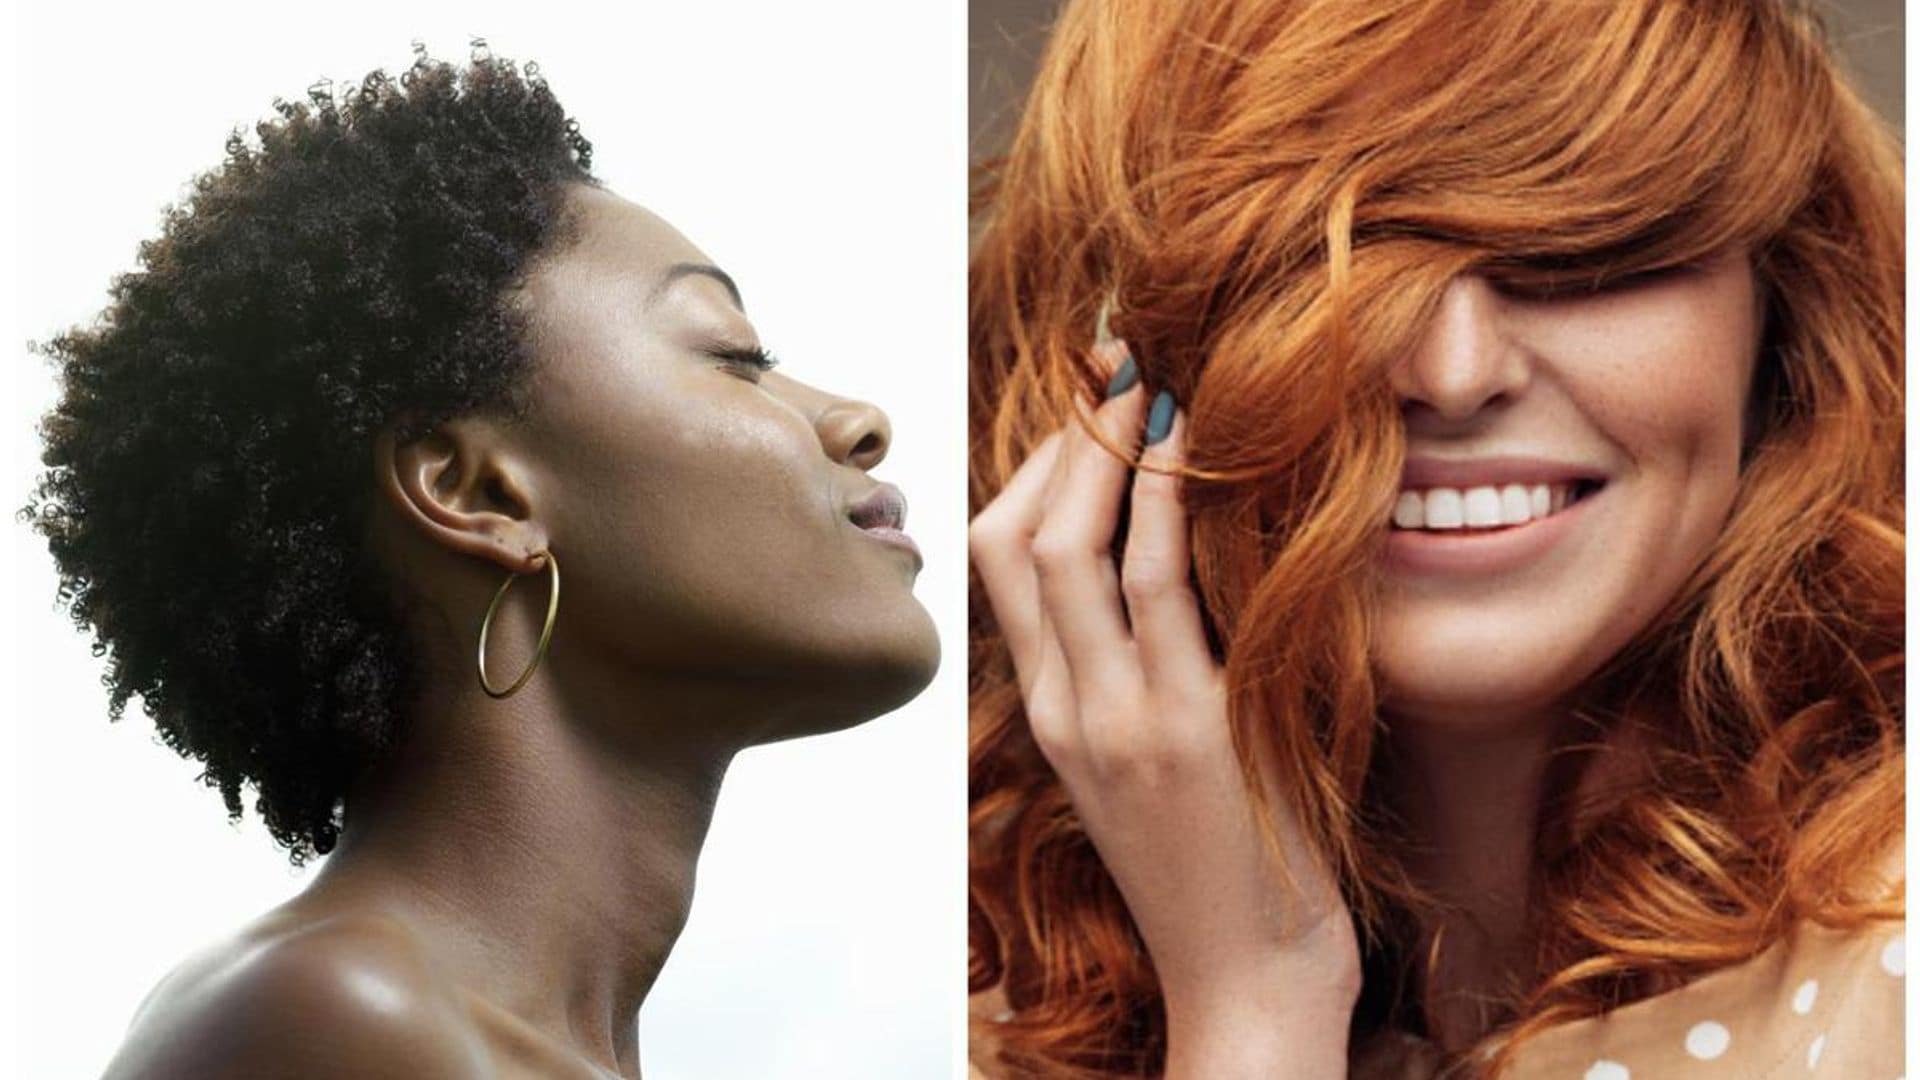 Experts reveal what you should be doing regularly to promote healthy hair growth